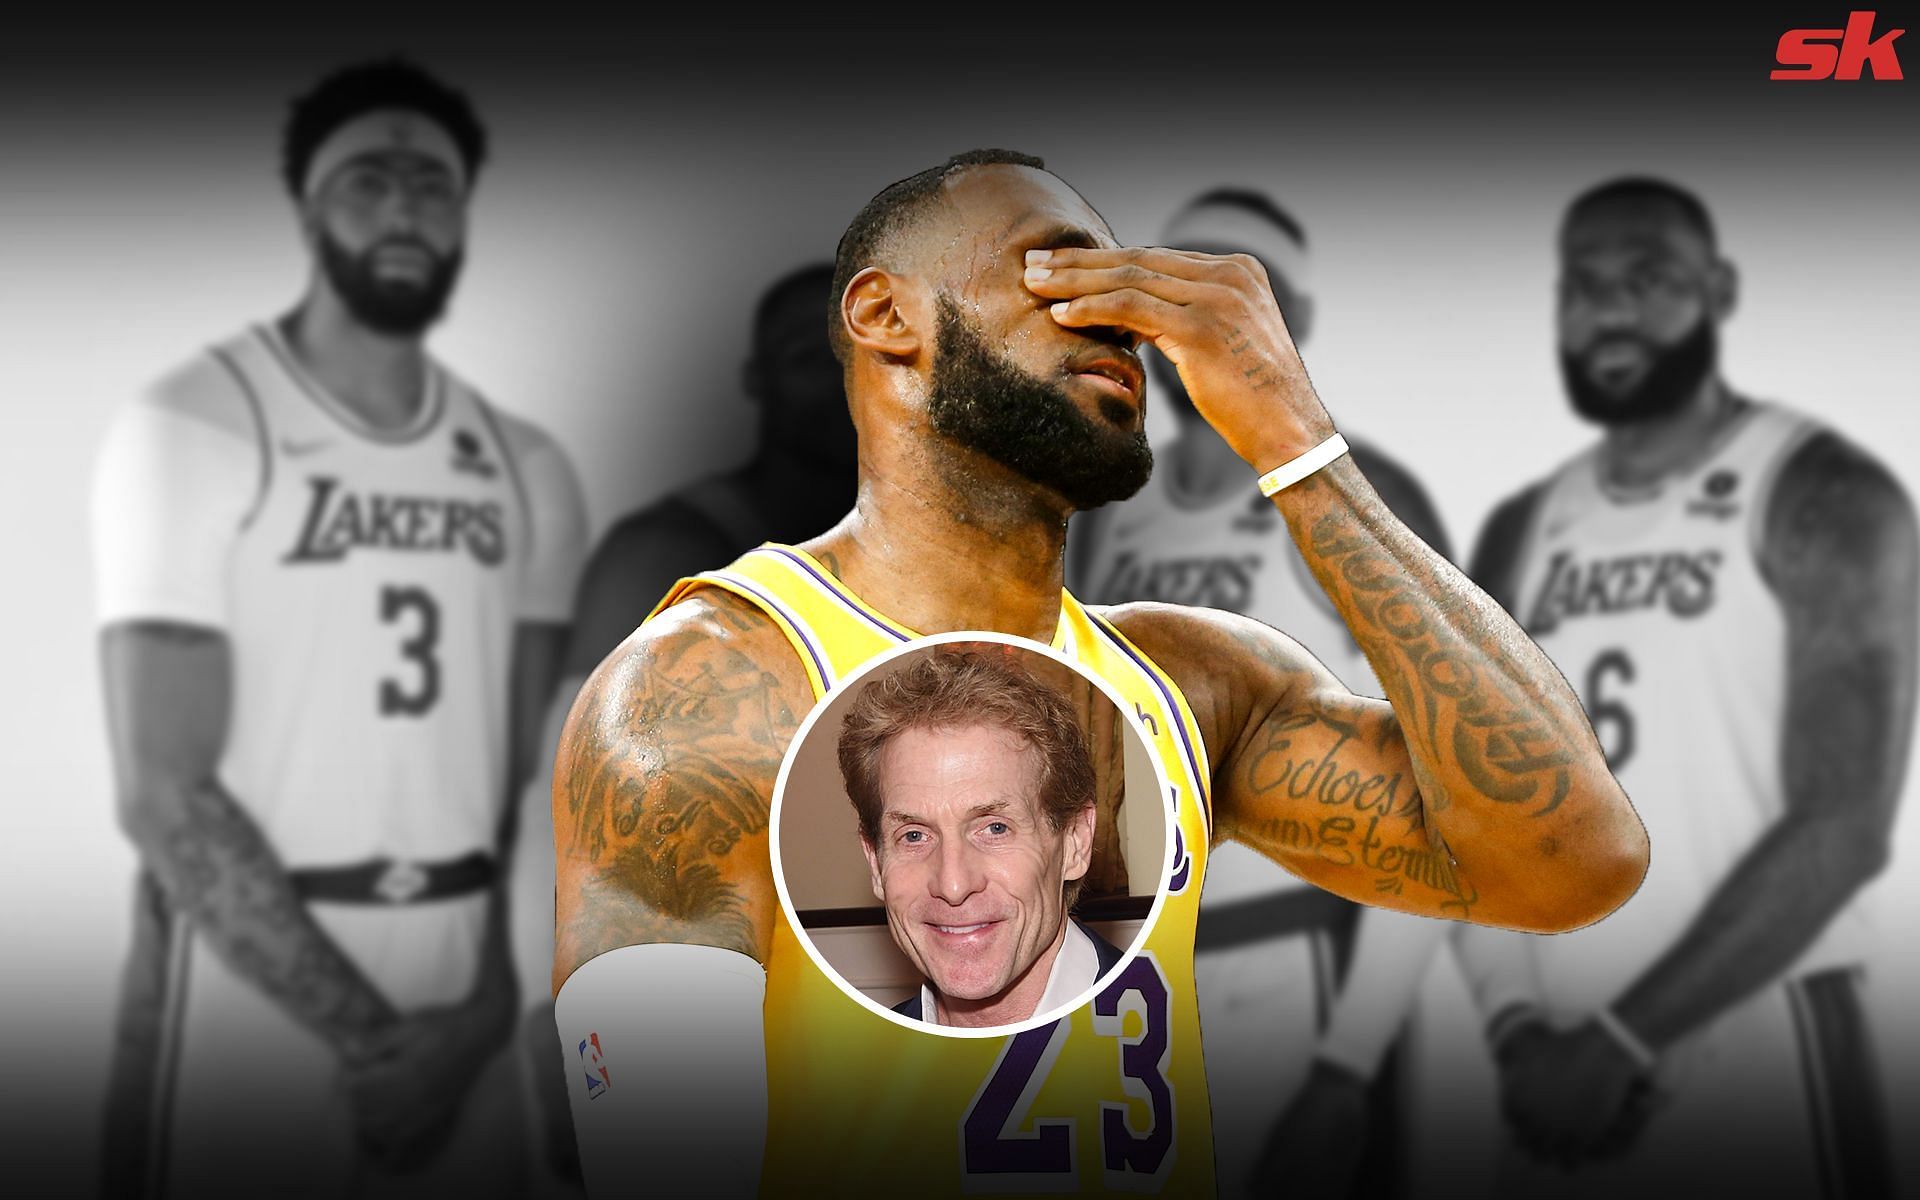 Skip Bayless opines that LeBron James has given up on the LA Lakers